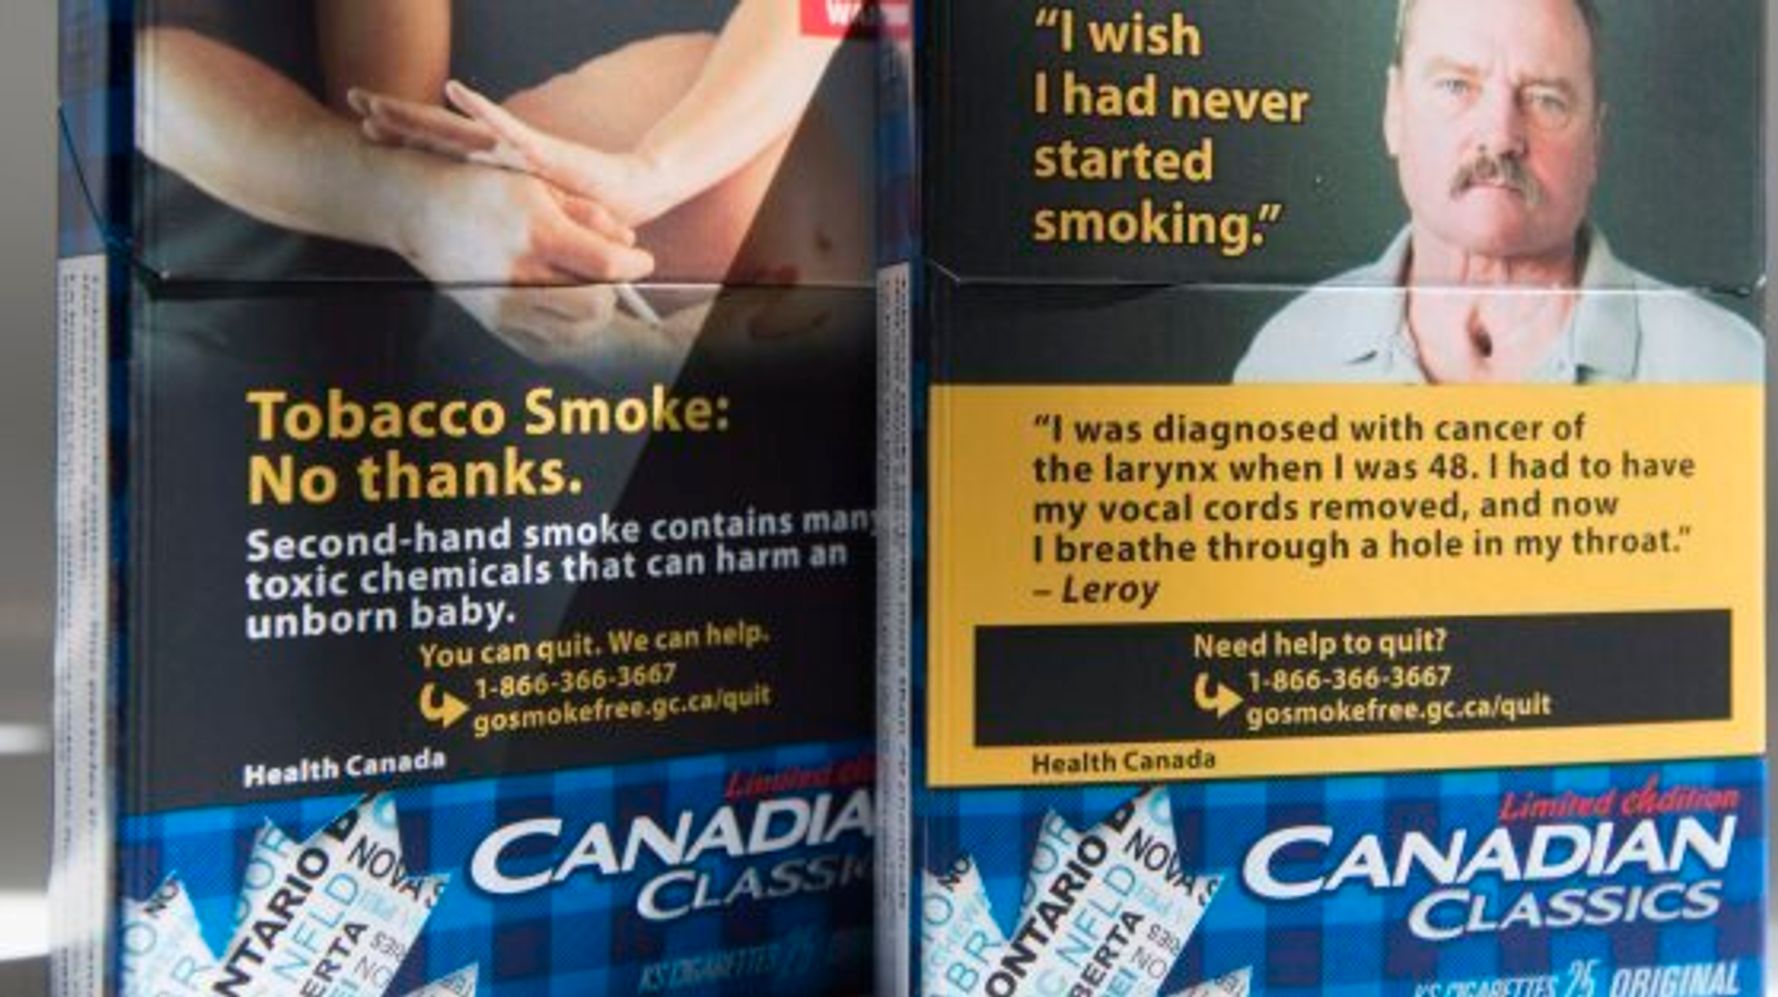 Canada Day Cigarettes By Canadian Classics Raise Ire Of Health Activists Huffpost Canada Life